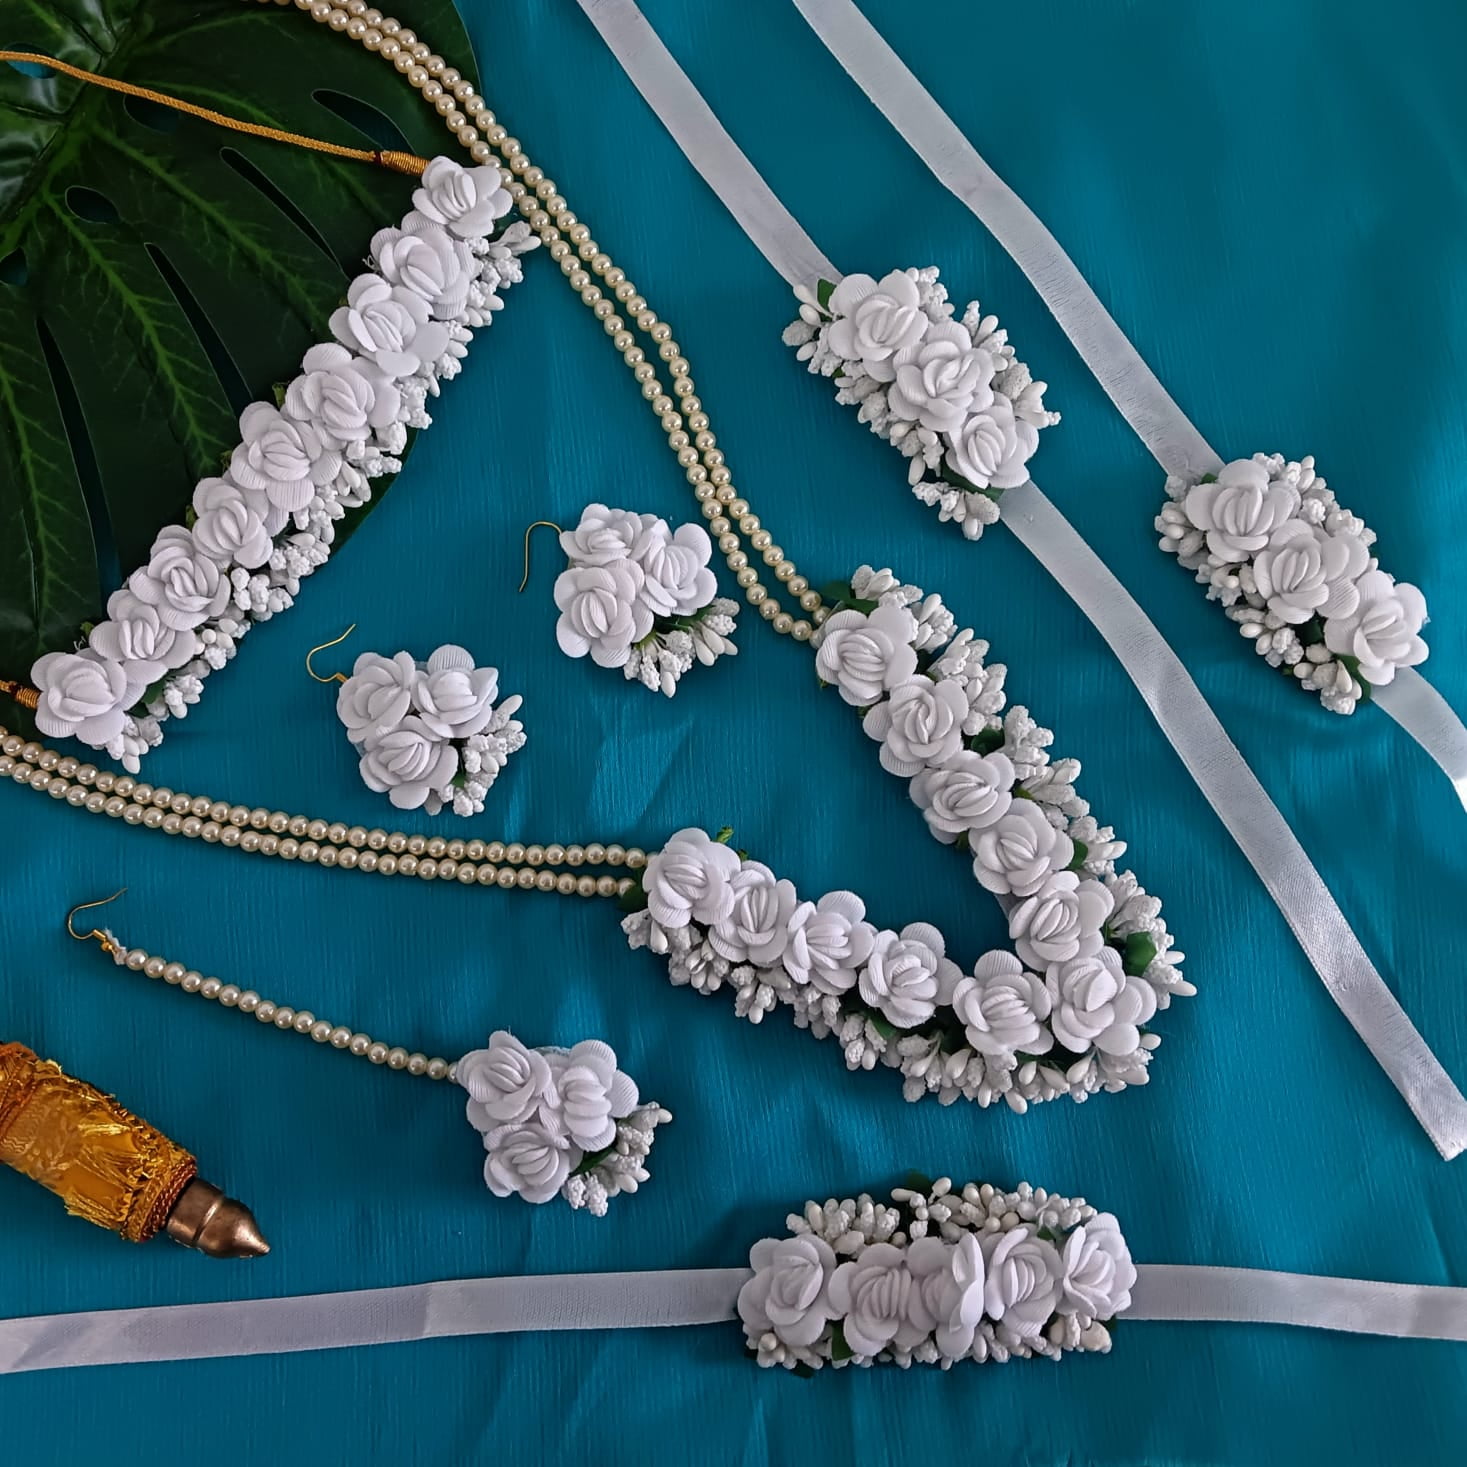 Sailya's Floral Jewelry and More